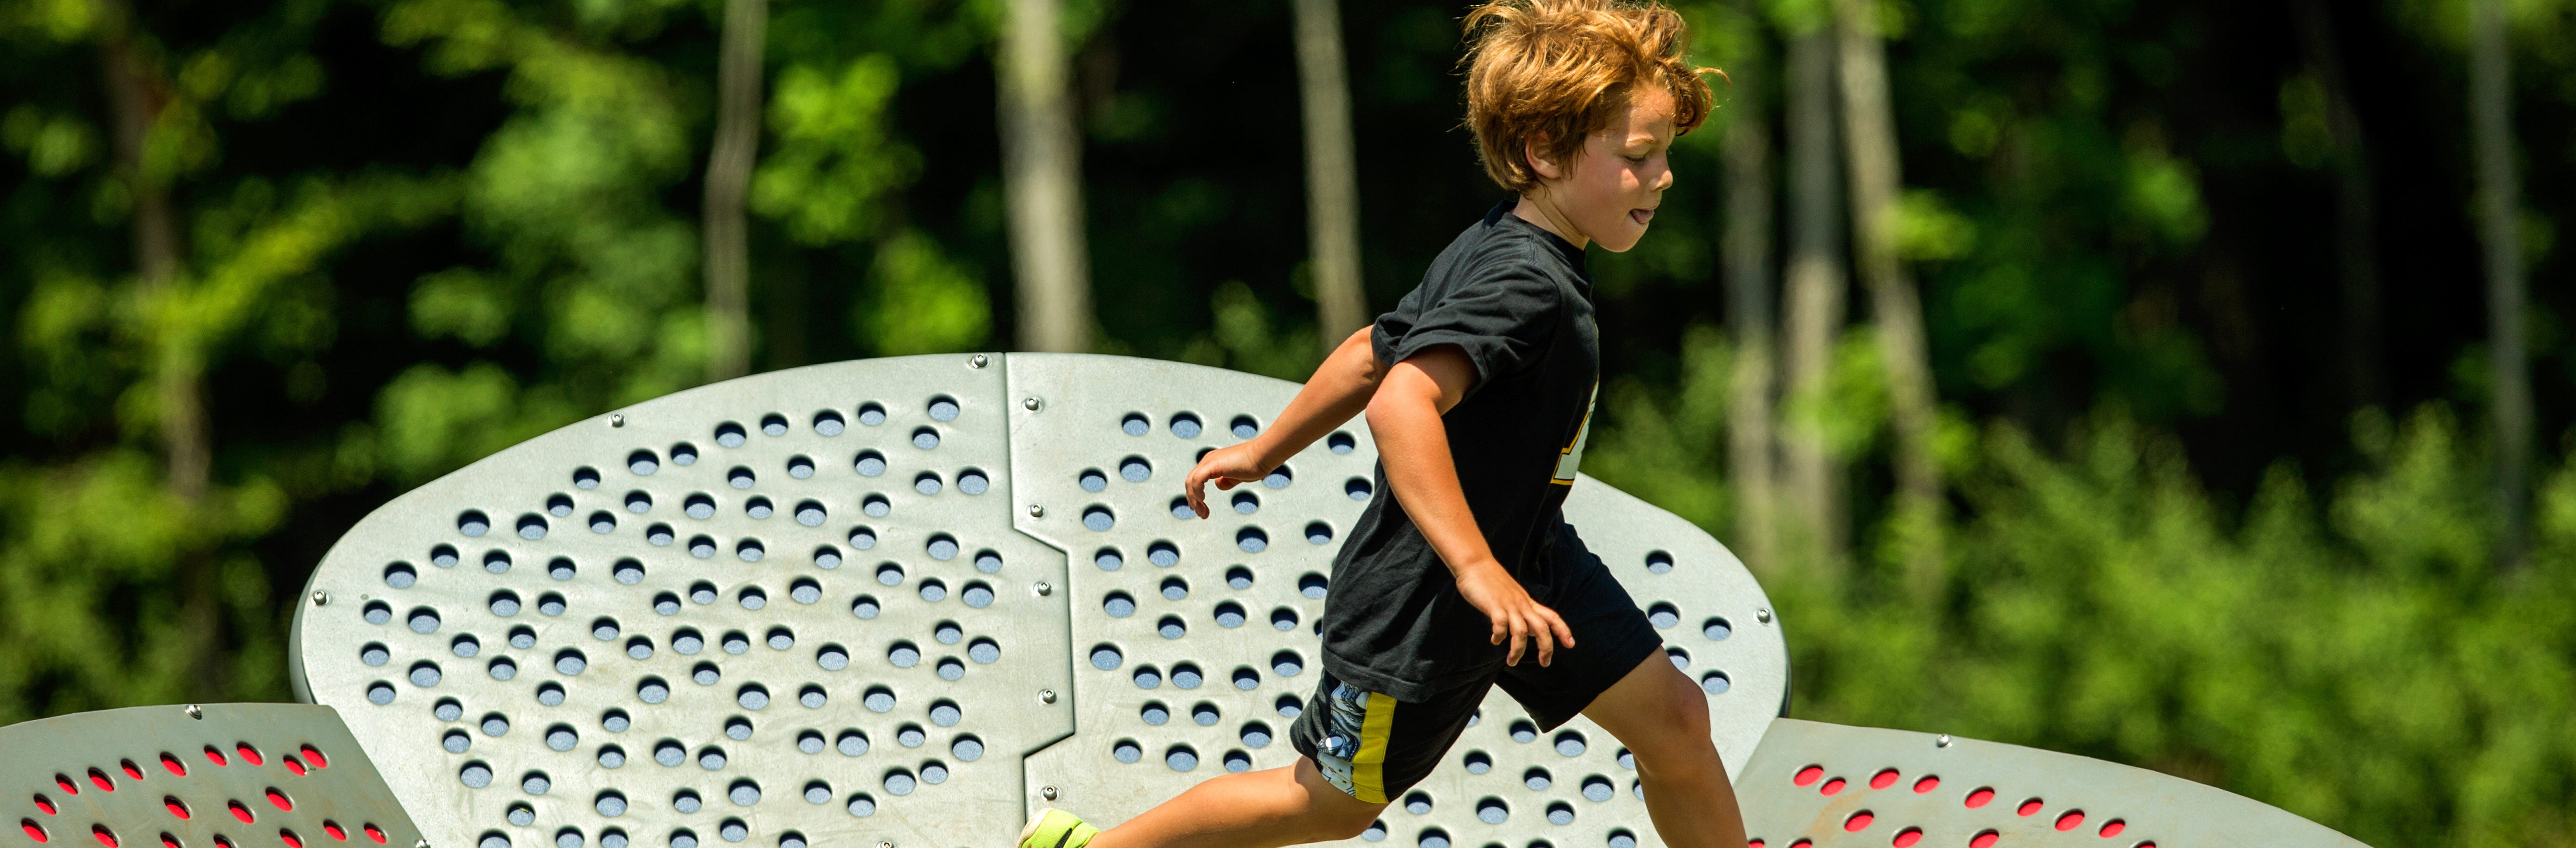 Outdoor Obstacle Courses in Minnesota Bring Competitive Fun and Fitness to All Generations